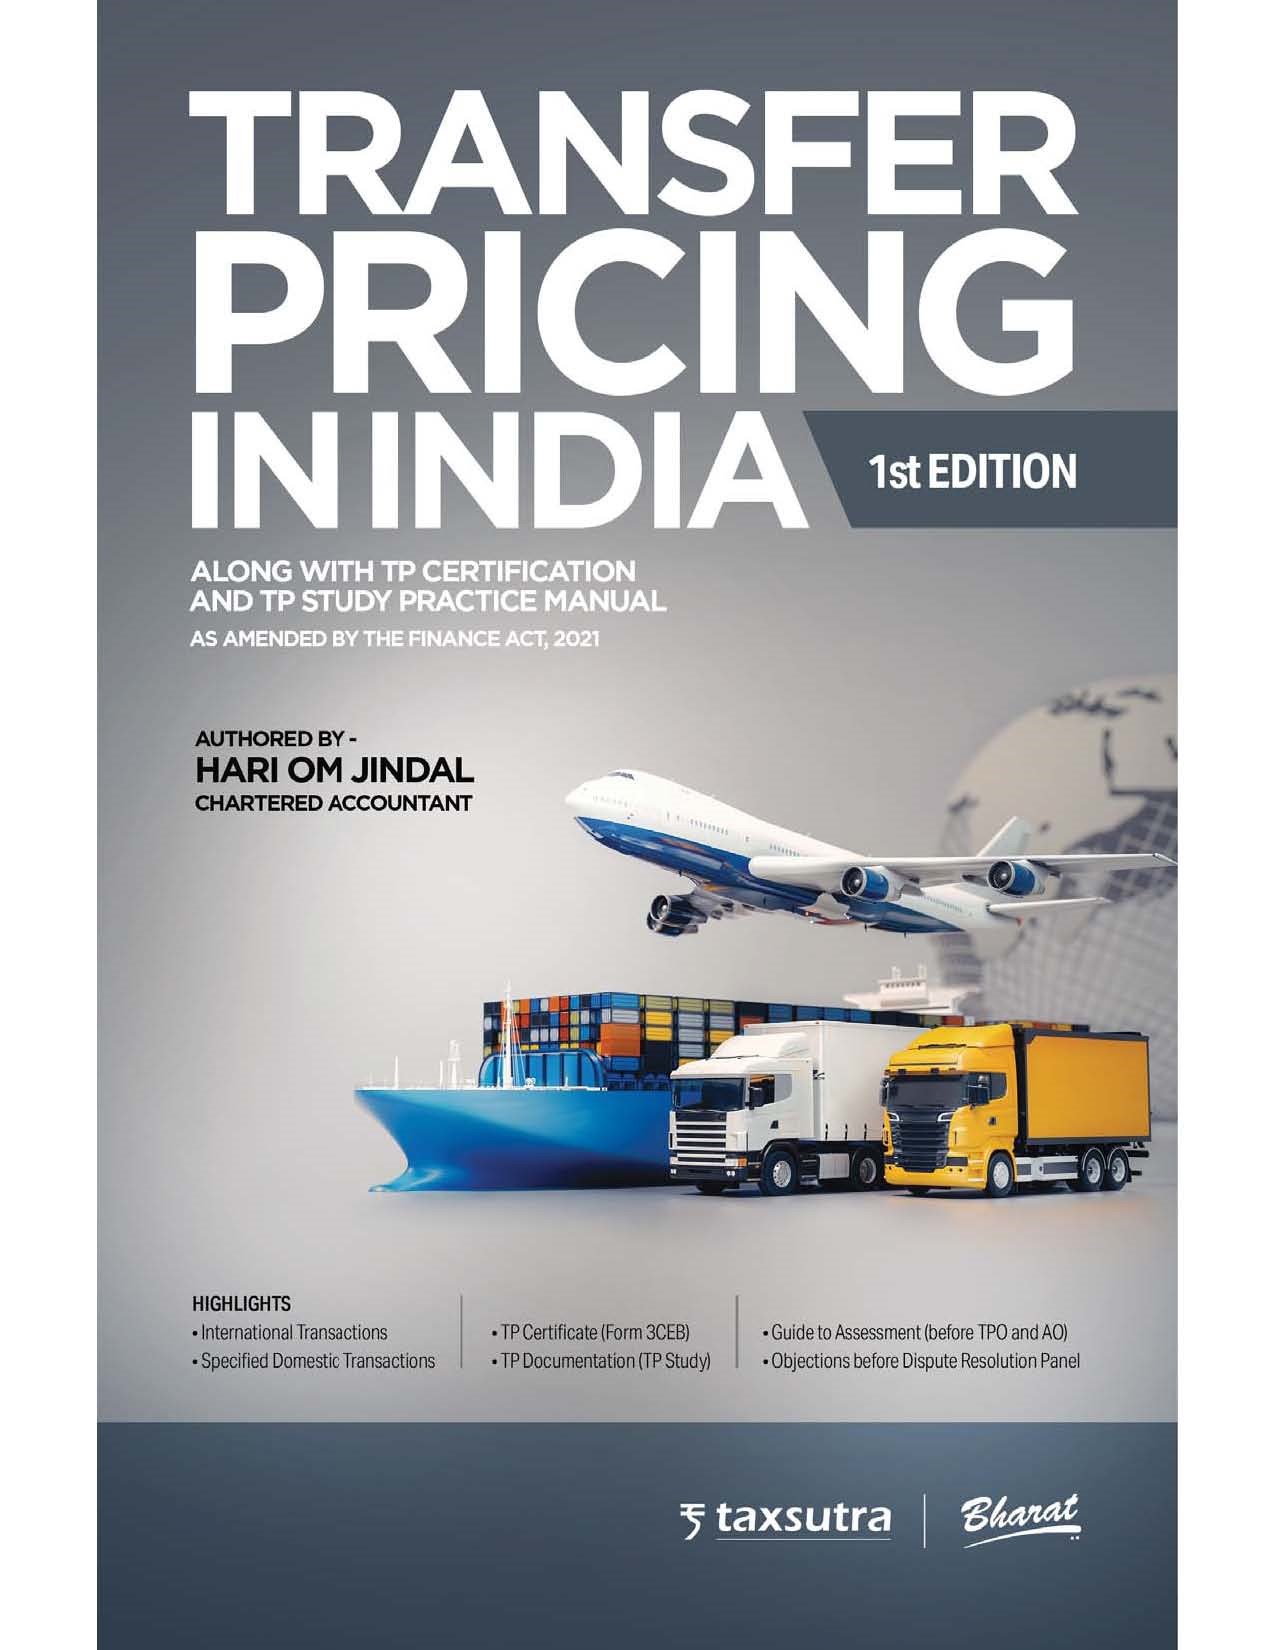 TRANSFER PRICING in India (Domestic & International)